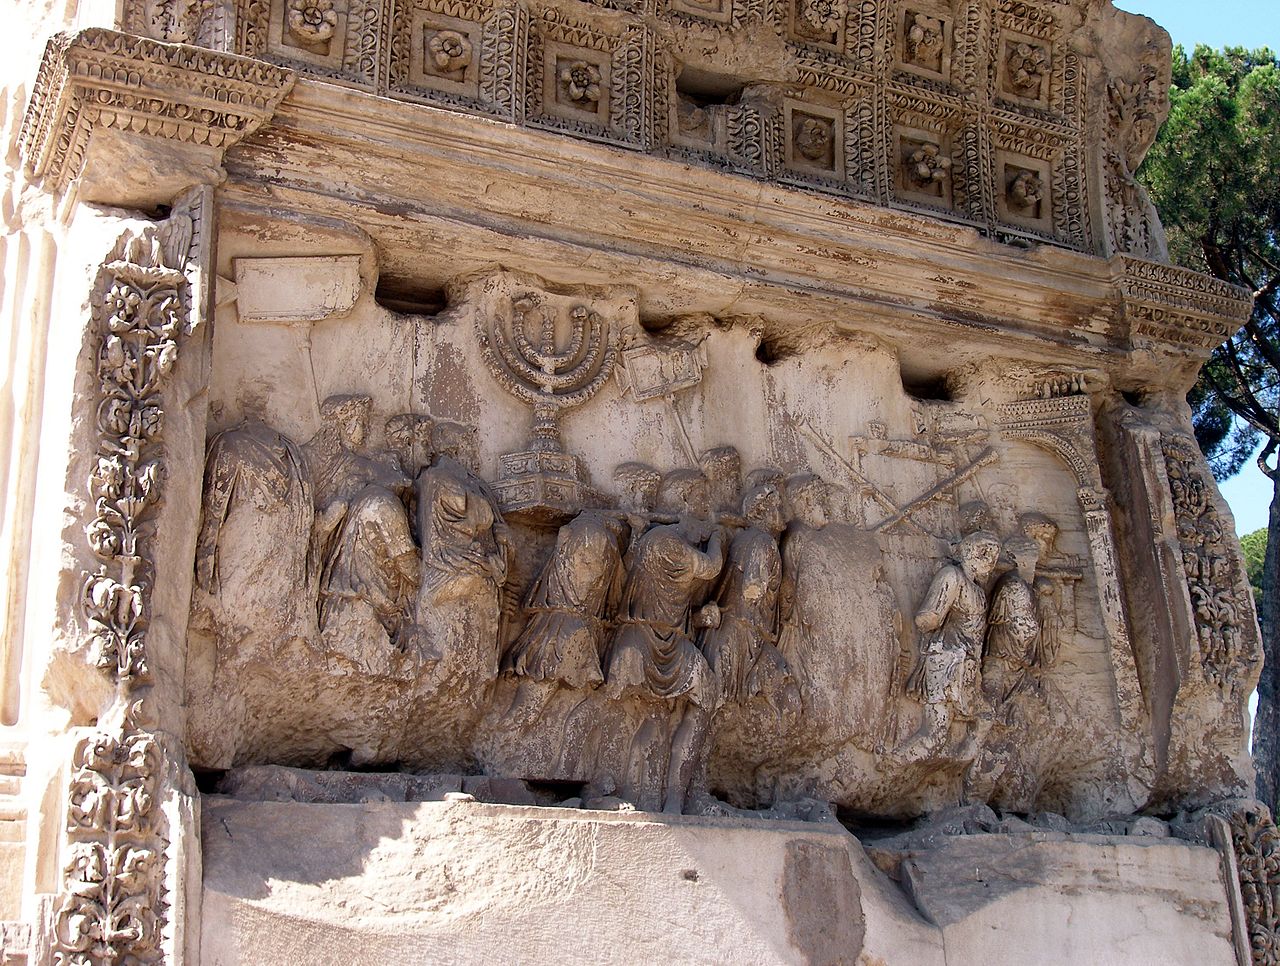 Close-up relief Arch of Titus showing the spoils from the siege of Jerusalem. Source: https://commons.wikimedia.org/w/index.php?curid=32817772